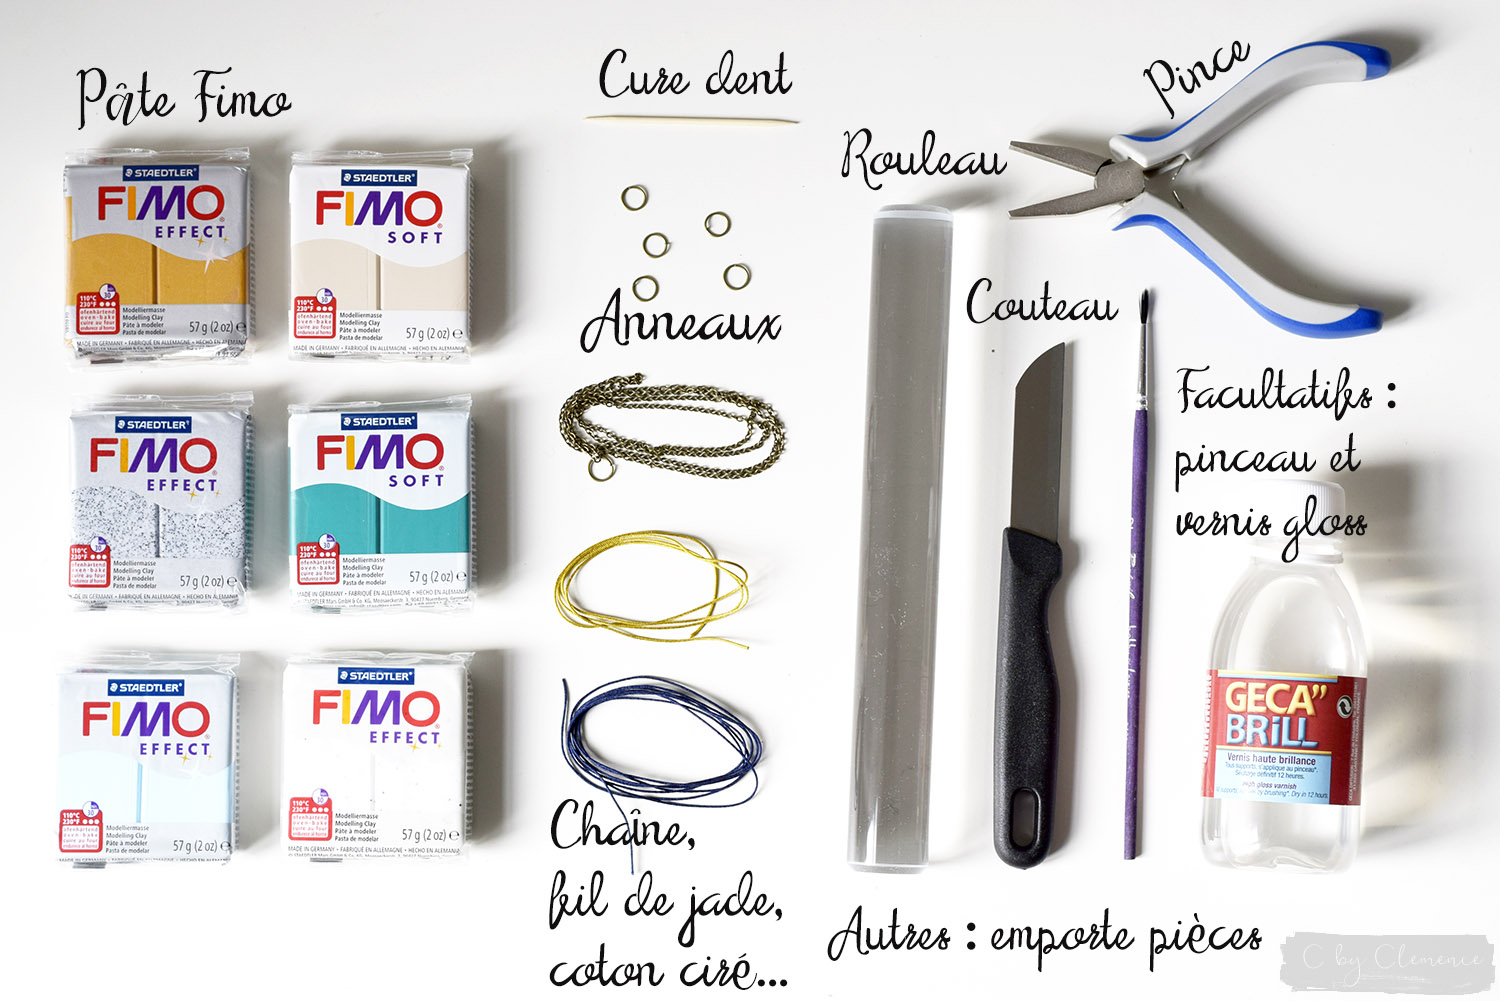 DIY COLLIERS FIMO MARBRES www.cbyclemence.com 01